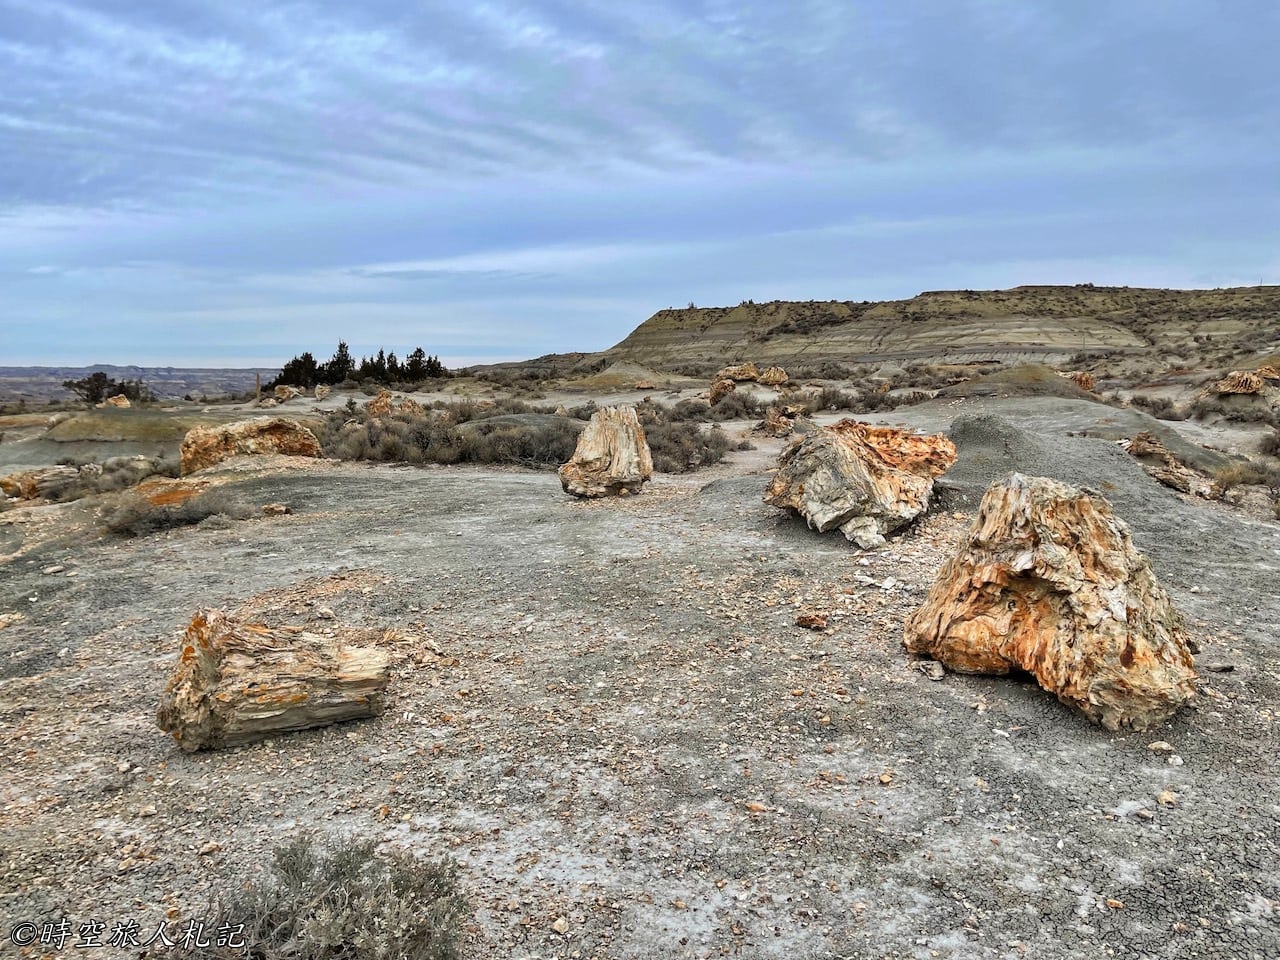 Theodore roosevelt national park,Petrified forest,羅斯福國家公園,石化林 29